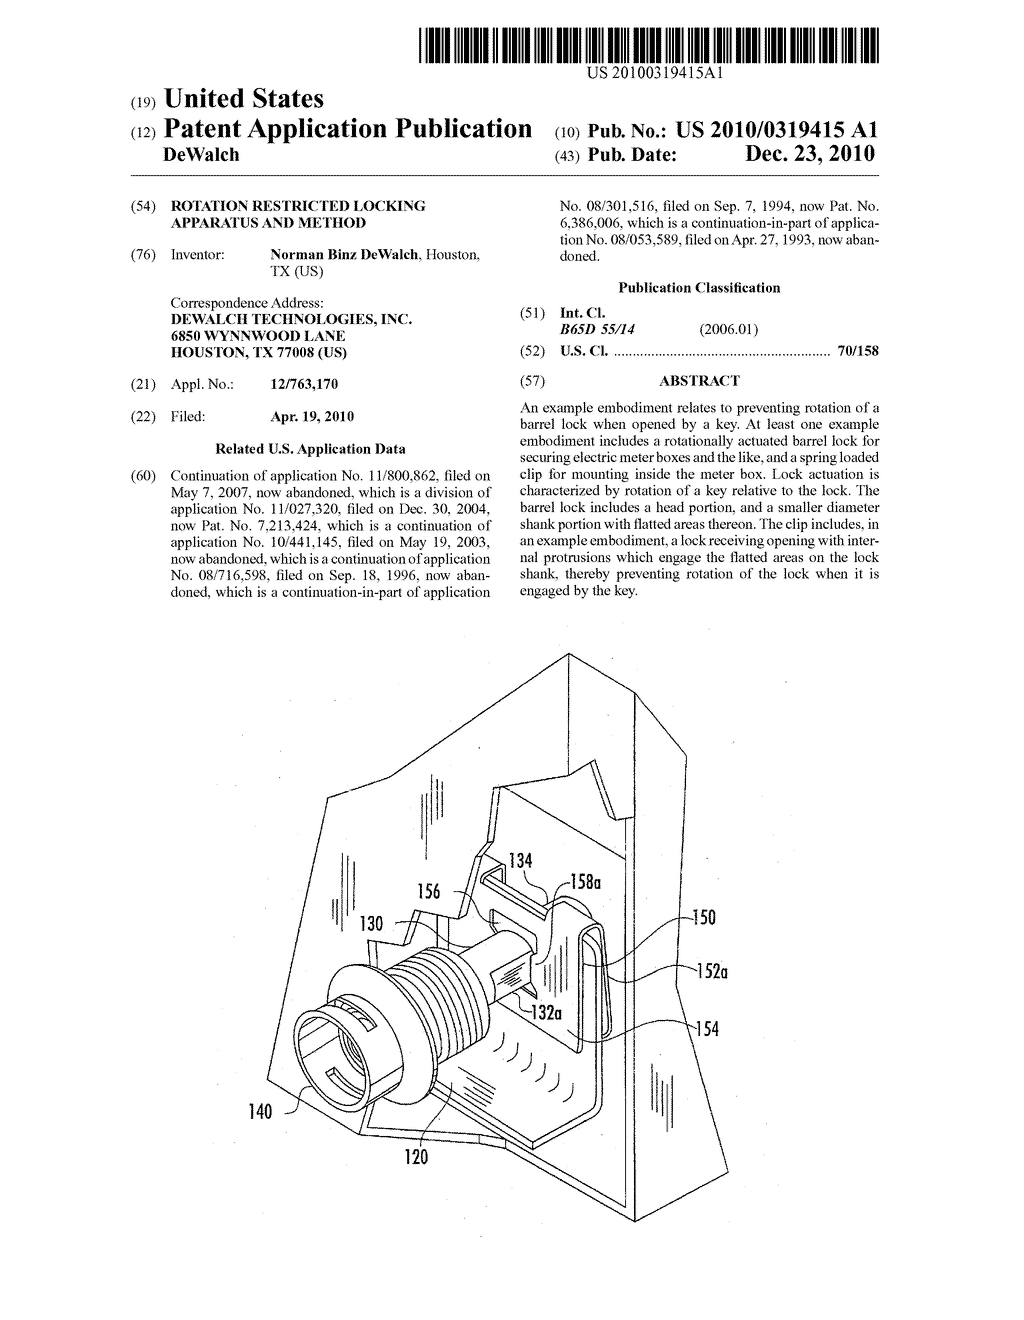 Rotation Restricted Locking Apparatus and Method - diagram, schematic, and image 01